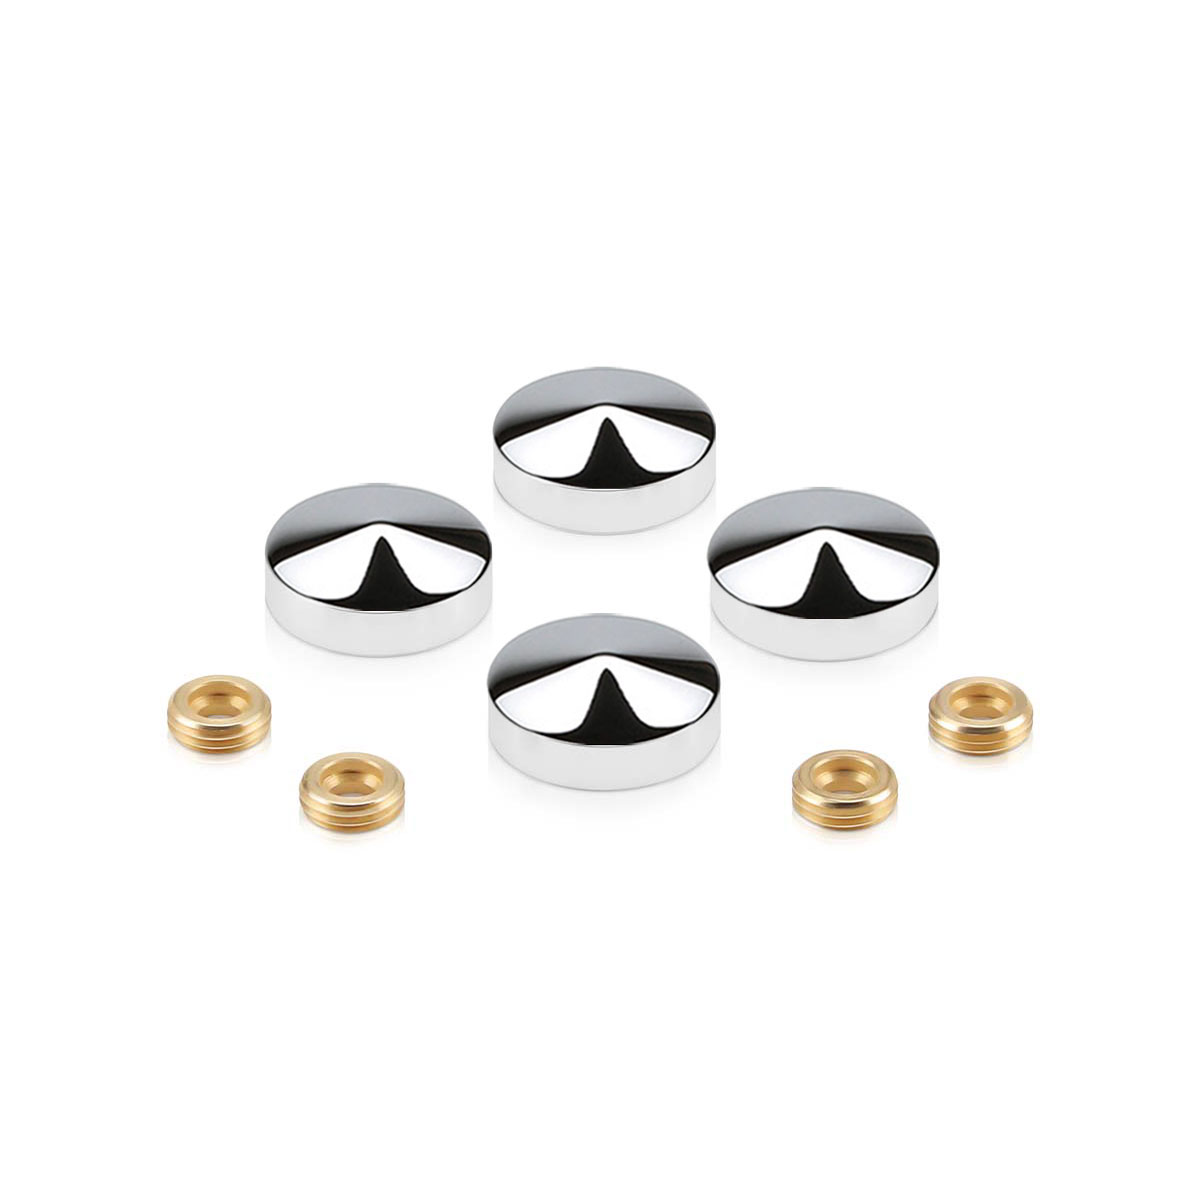 Set of Conical Screw Cover Diameter 7/8'', Polished Stainless Steel Finish (Indoor or Outdoor)